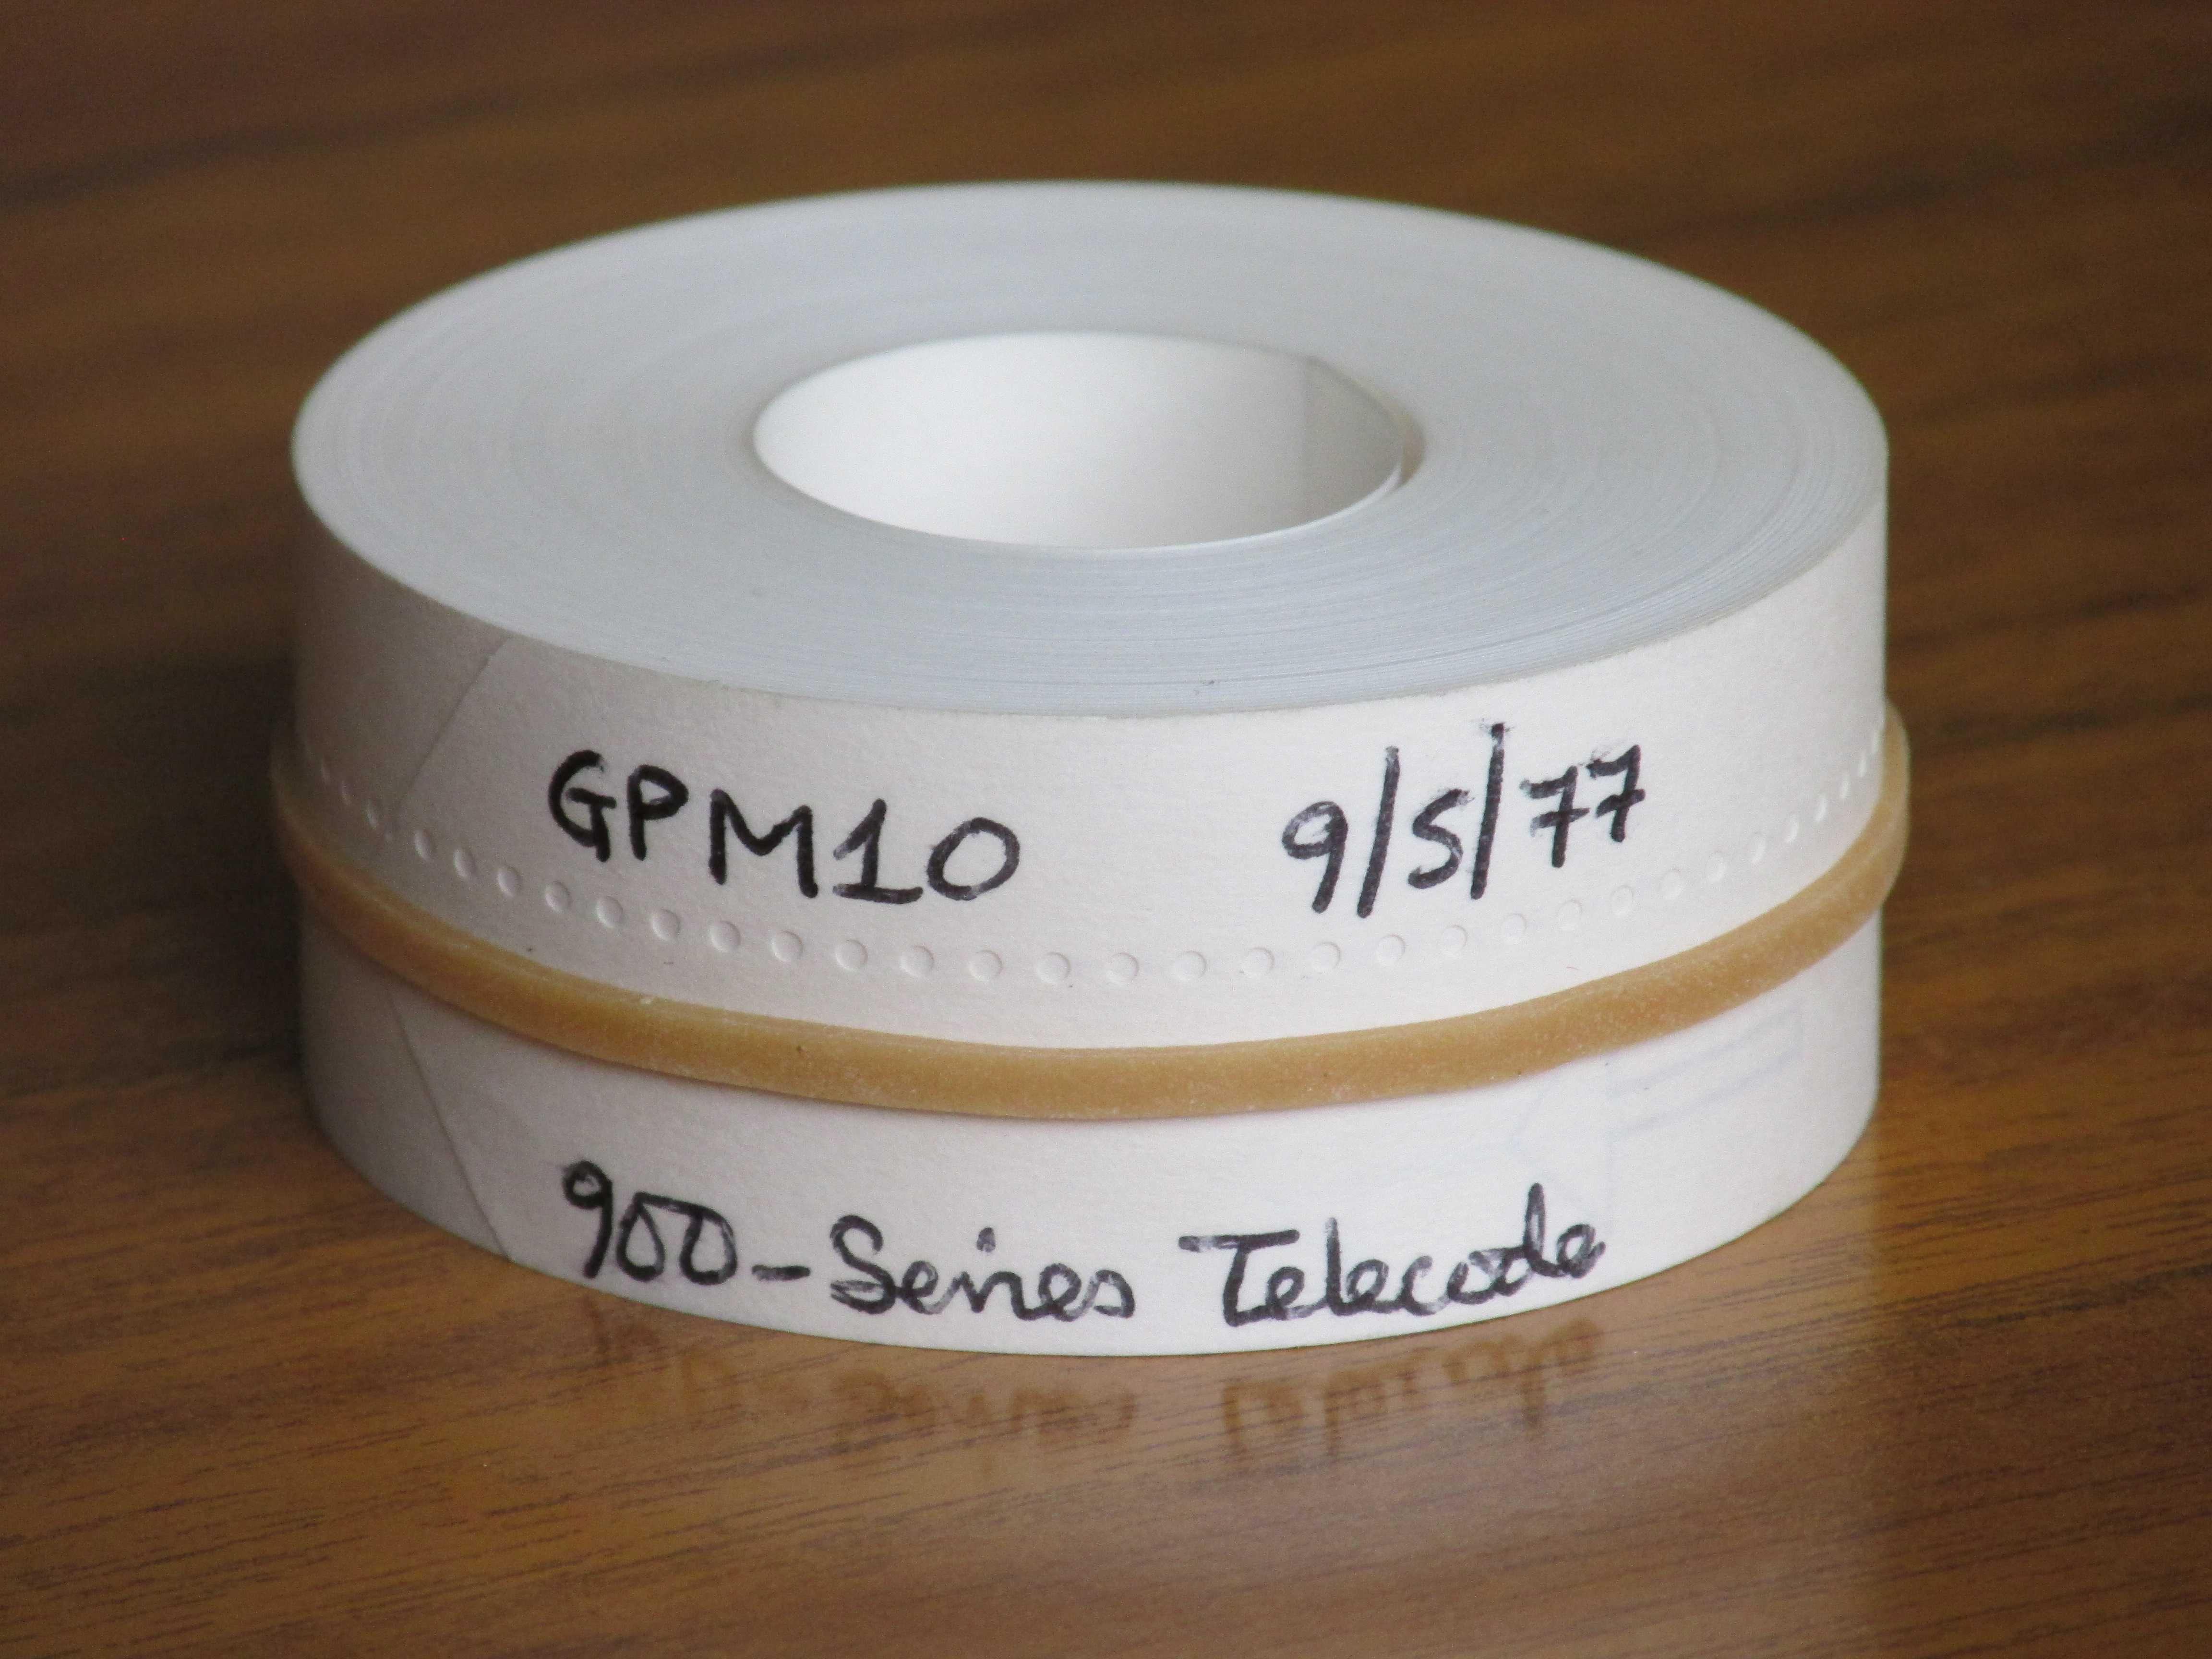 The GPM paper tape